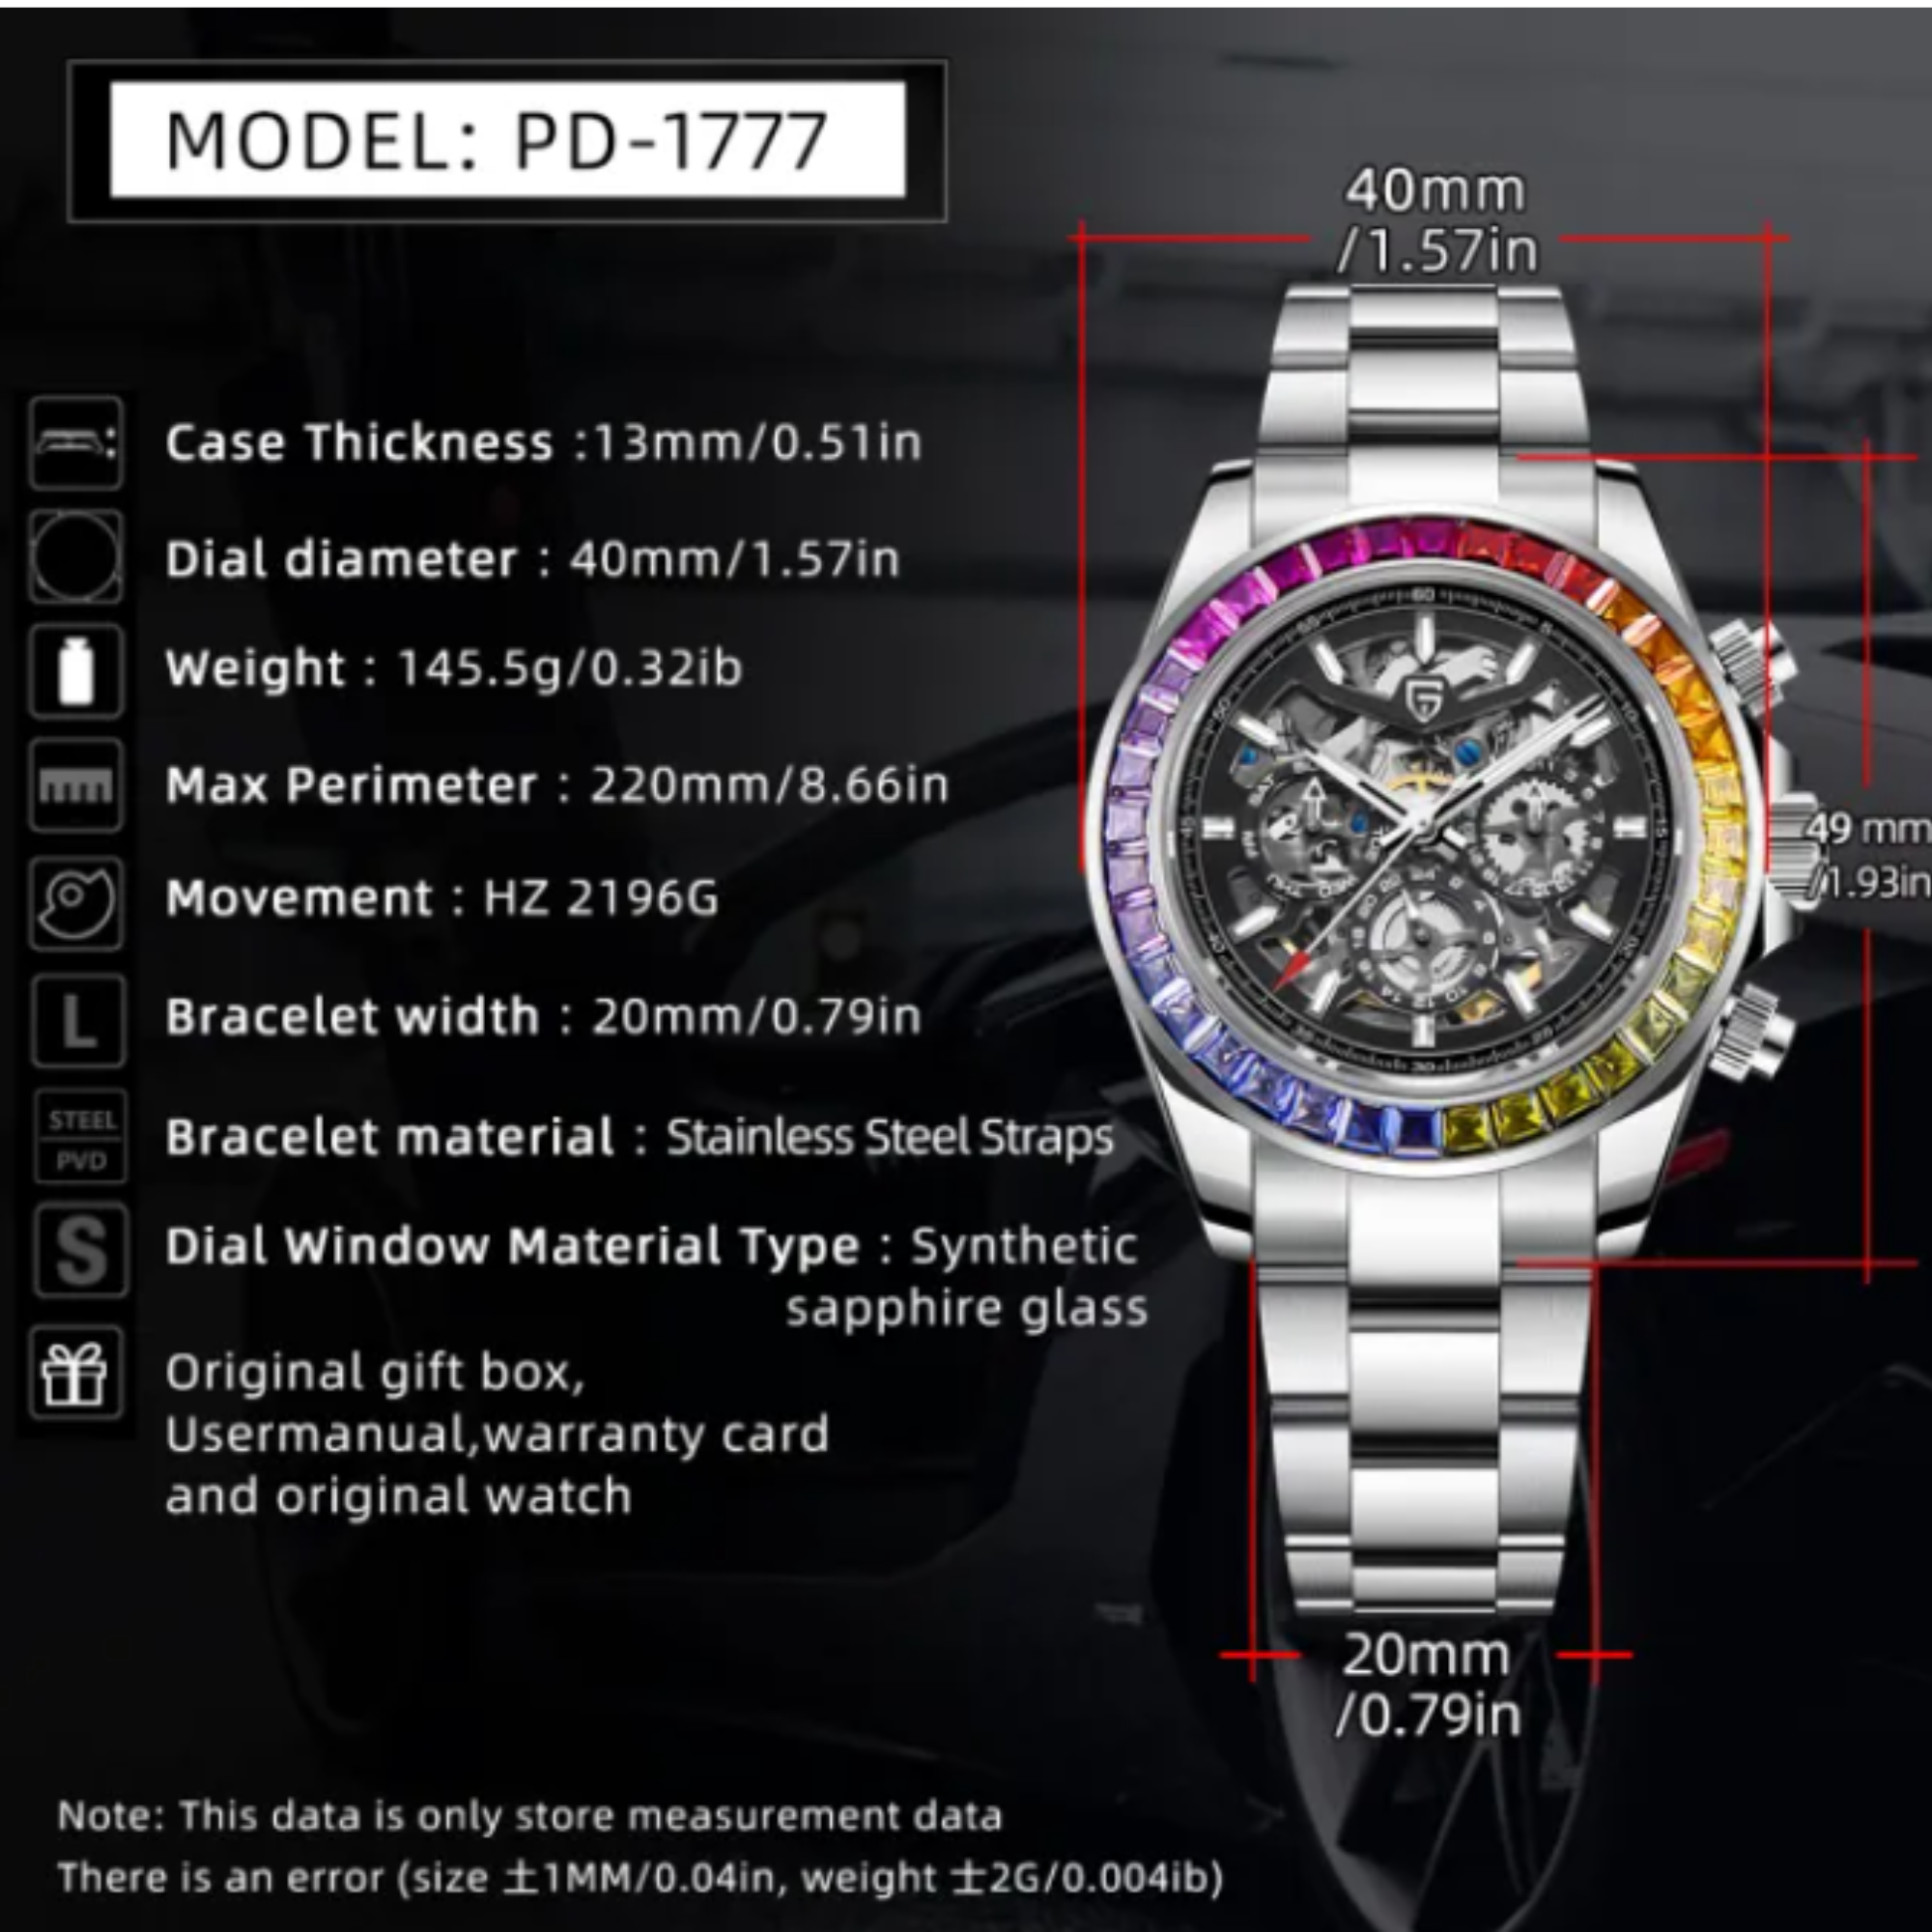 PAGANI DESIGN PD-1777 Automatic Stainless Steel Skeleton Mechanical Wrist Watch - Rainbow Dial